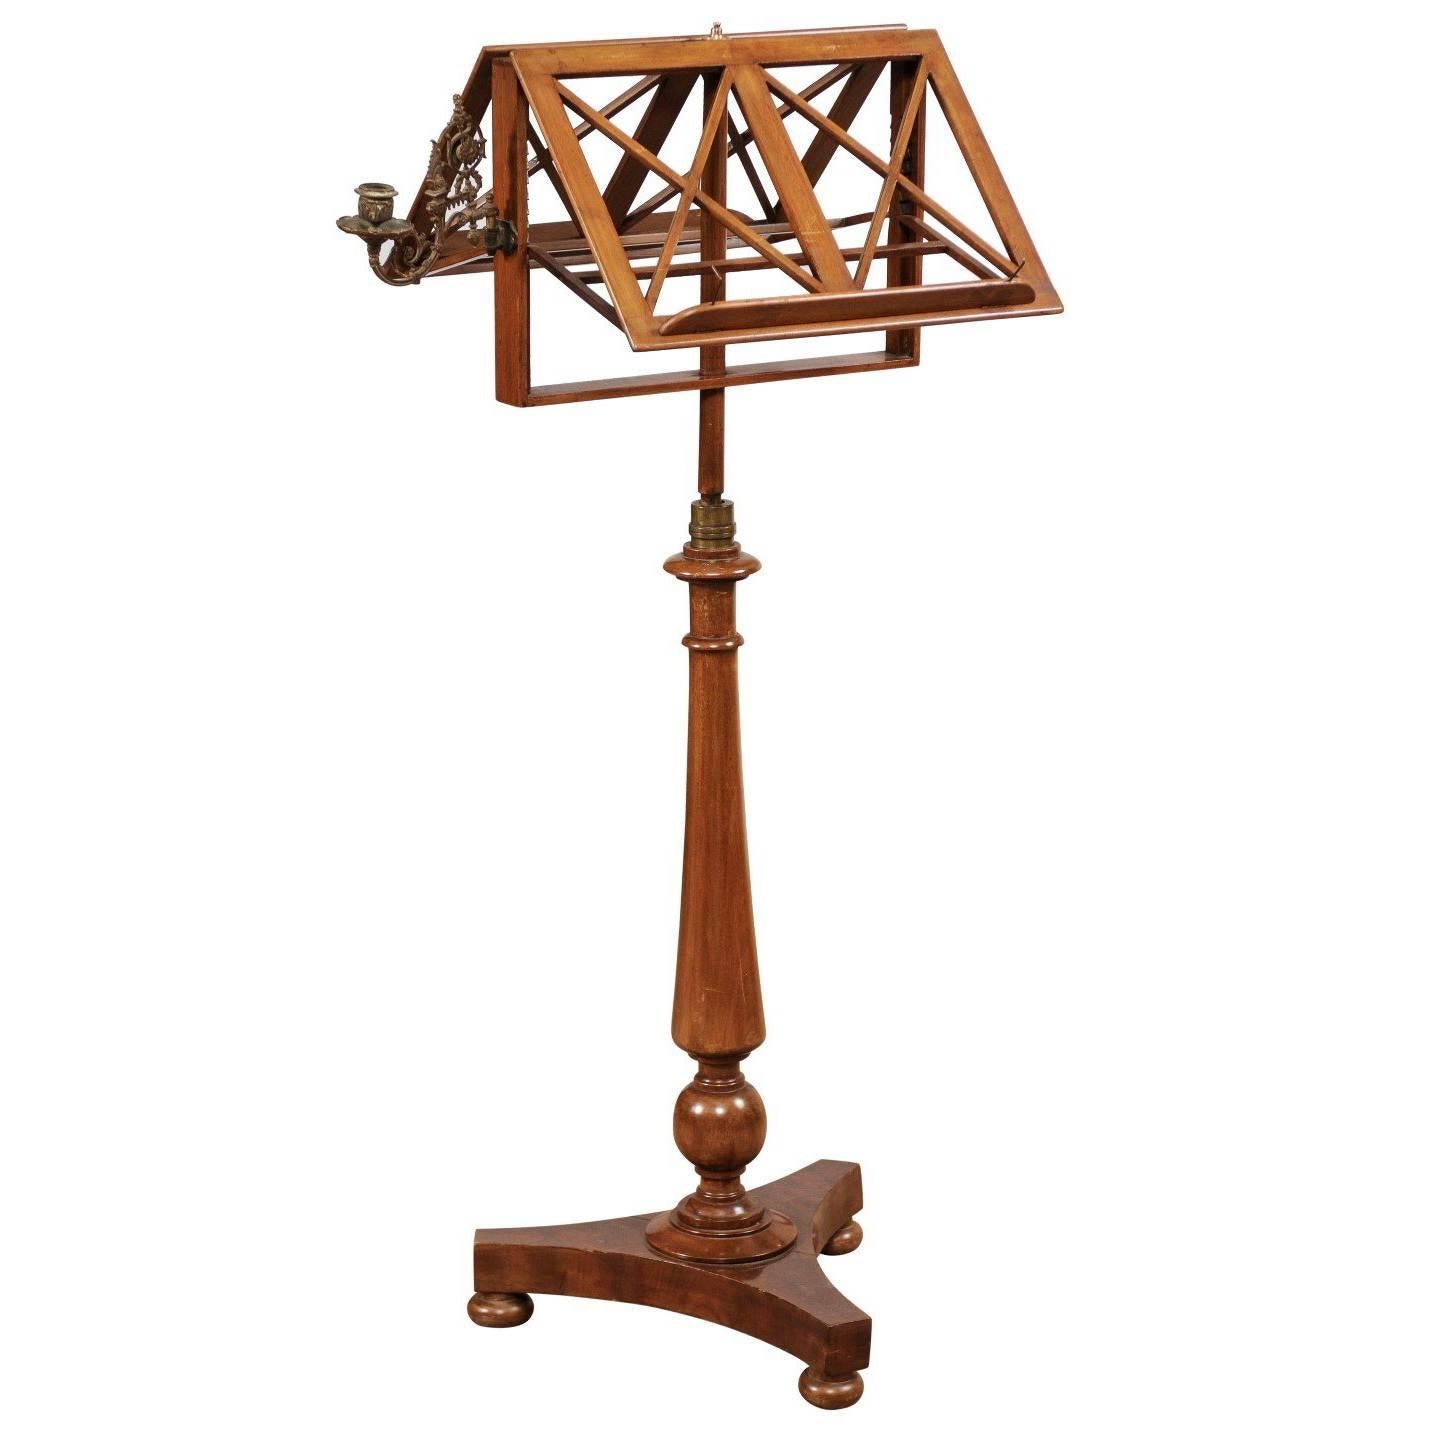 Duet Music Stand in Mahogany with Scone, 19th Century France